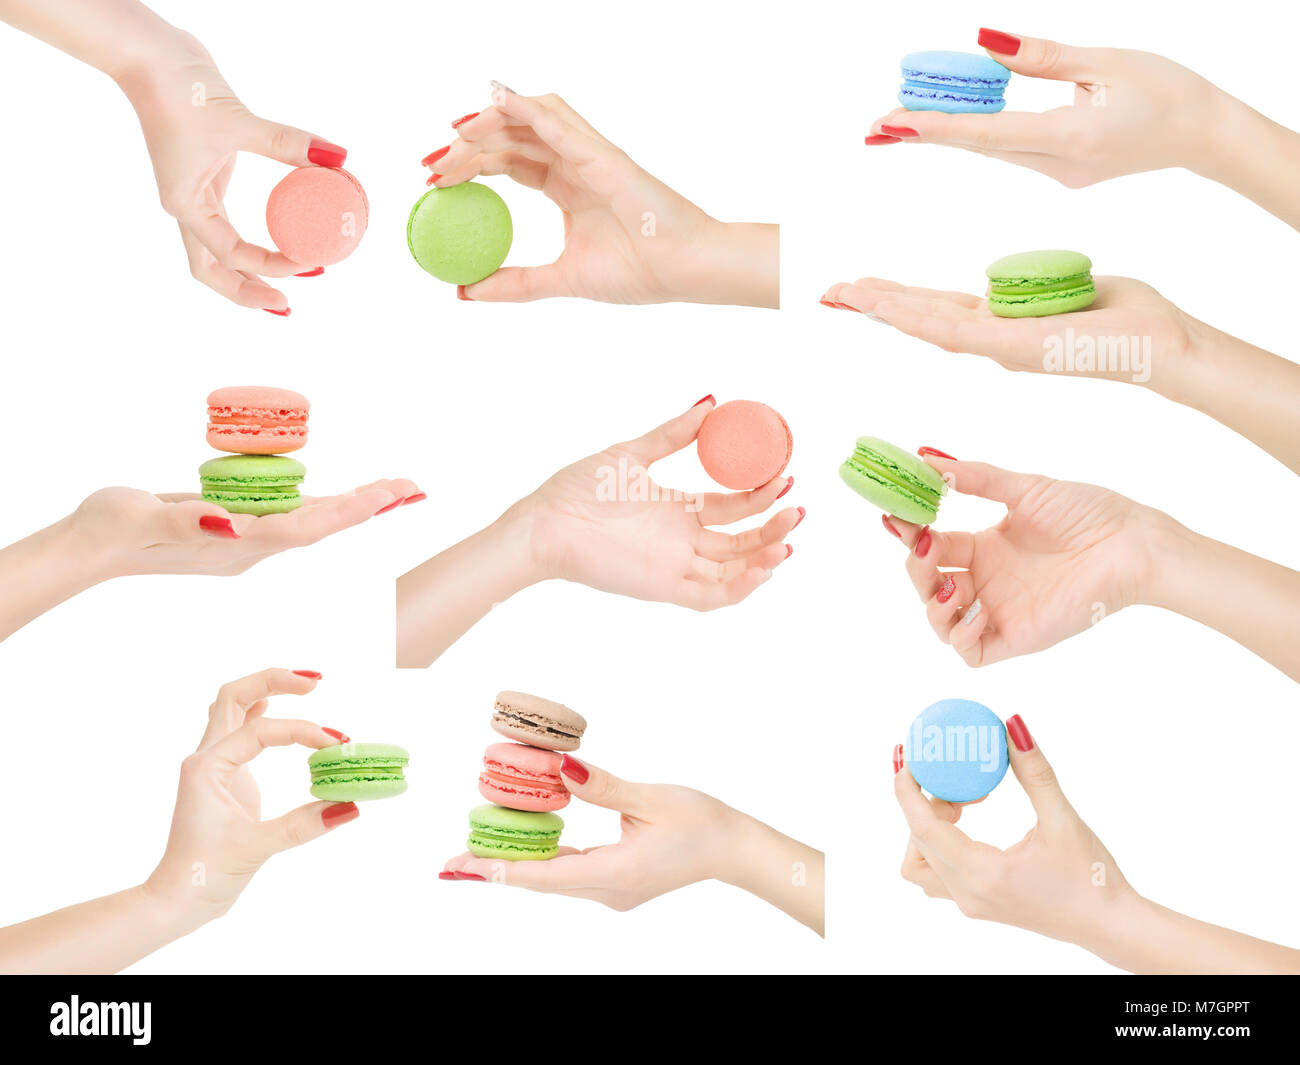 Woman hands with beautiful skin and nail polish holding, showing or measuring macaroons set. Isolated on white, clipping path included Stock Photo